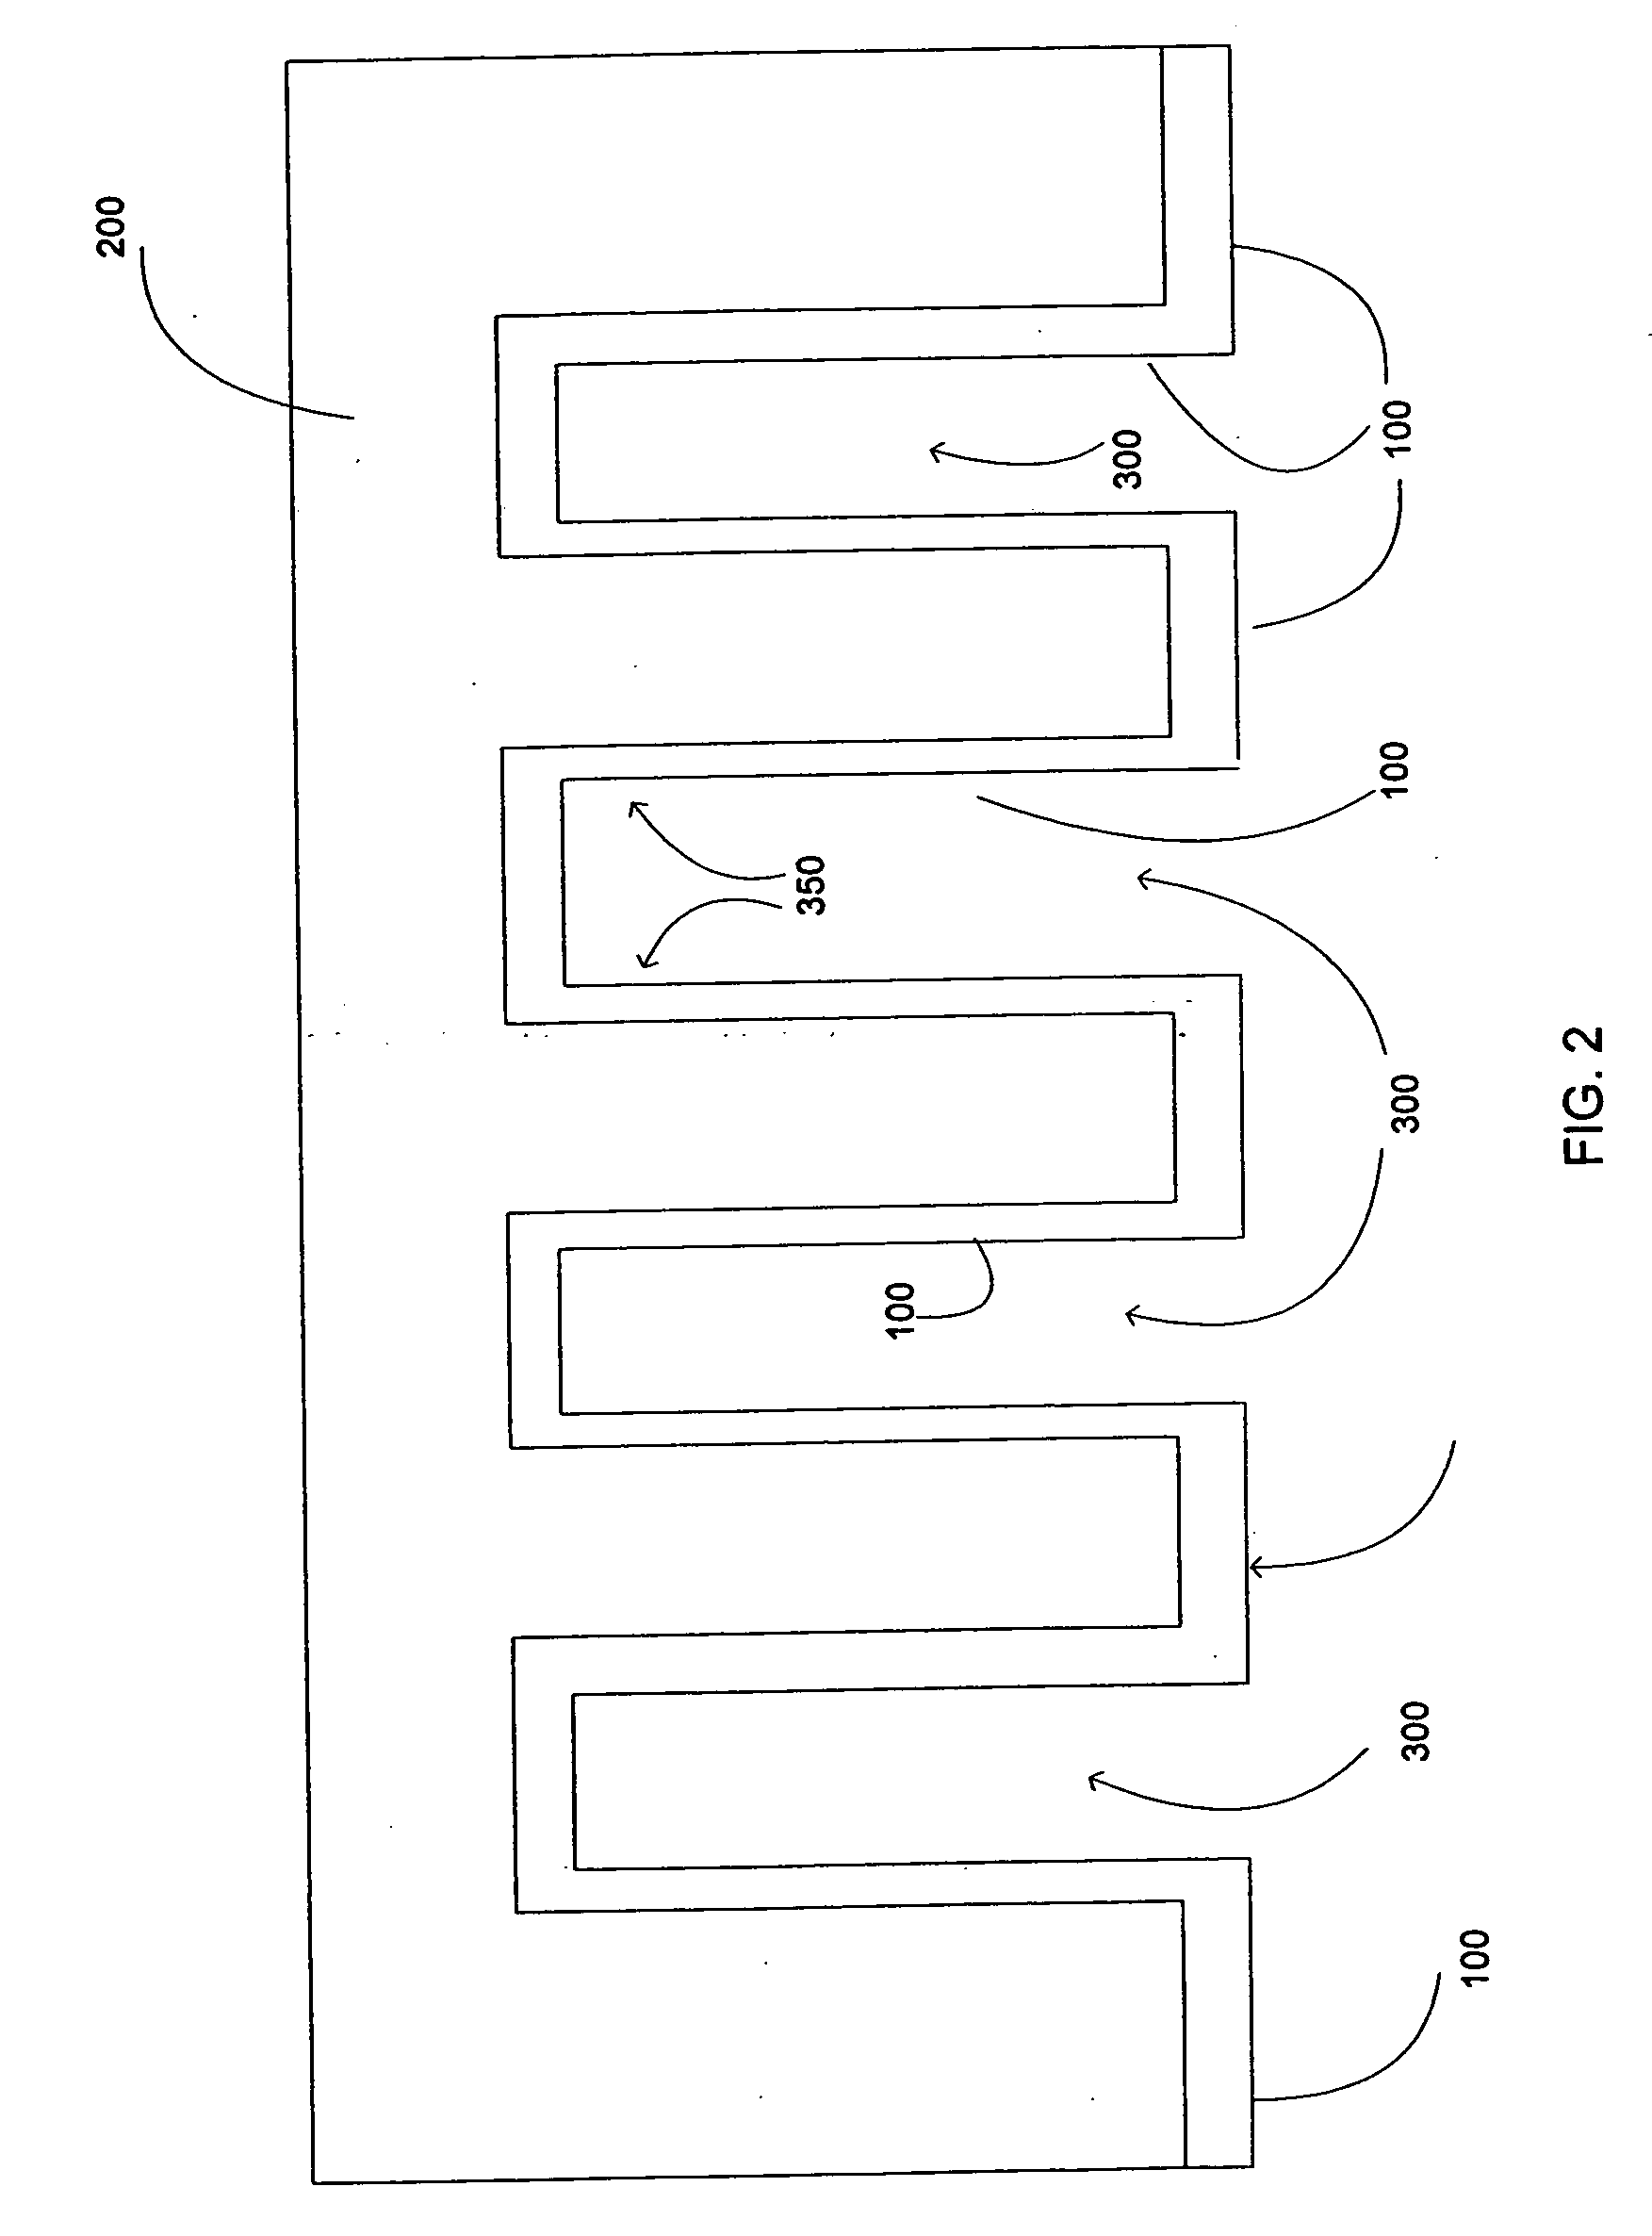 Isotropic glass-like conformal coatings and methods for applying same to non-planar substrate surfaces at microscopic levels